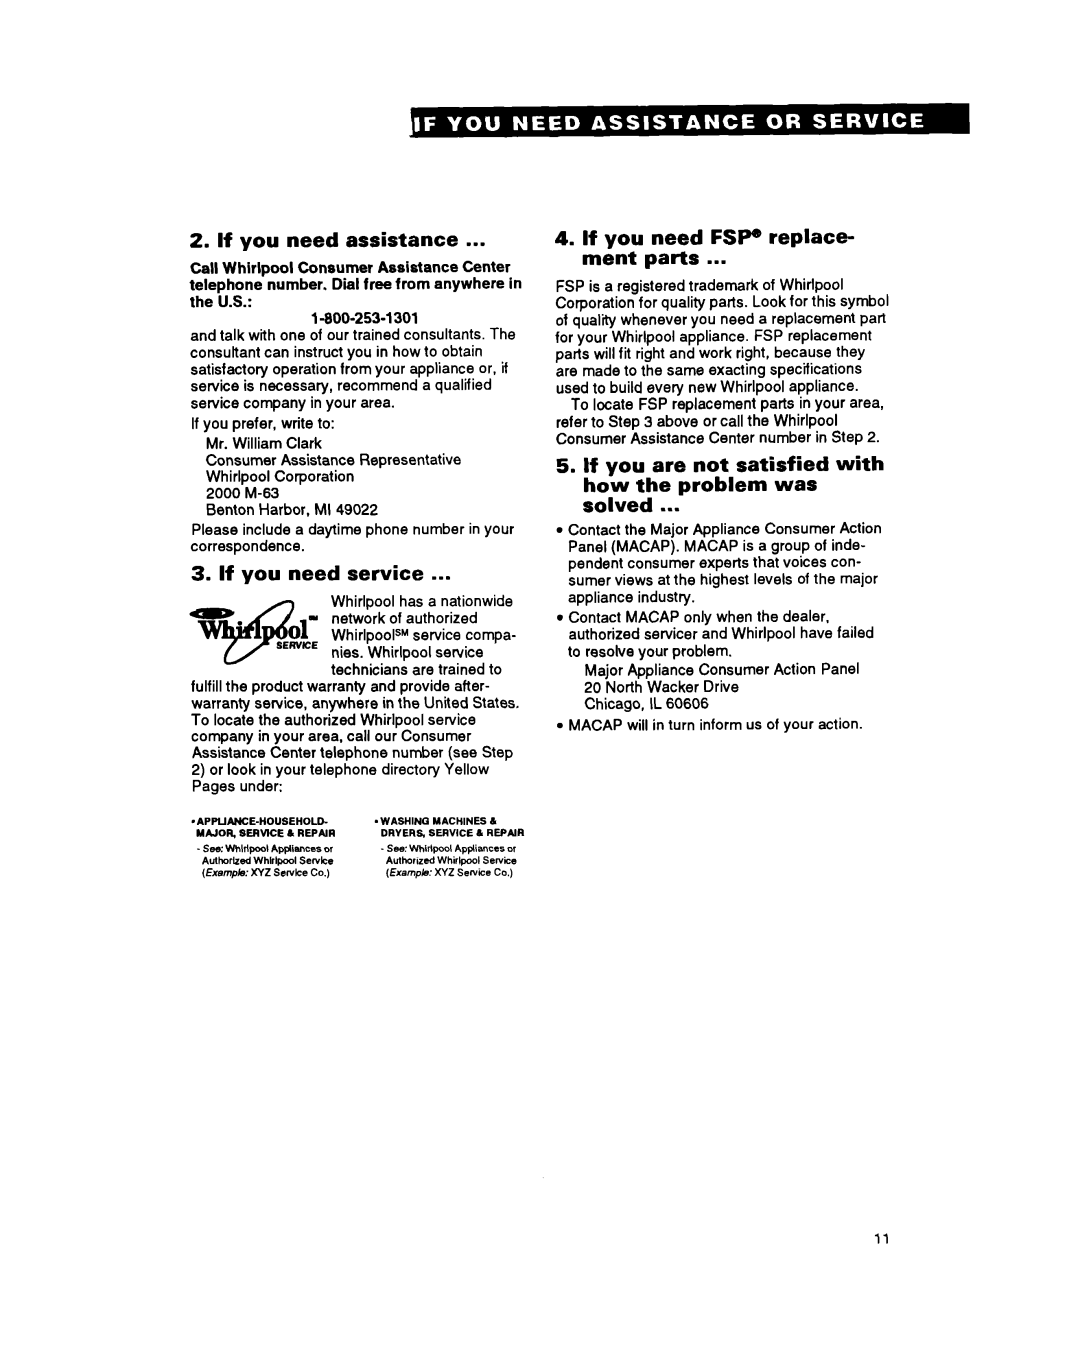 Whirlpool ACM052 warranty If you need assistance, service, If you need FSP replace- ment parts 